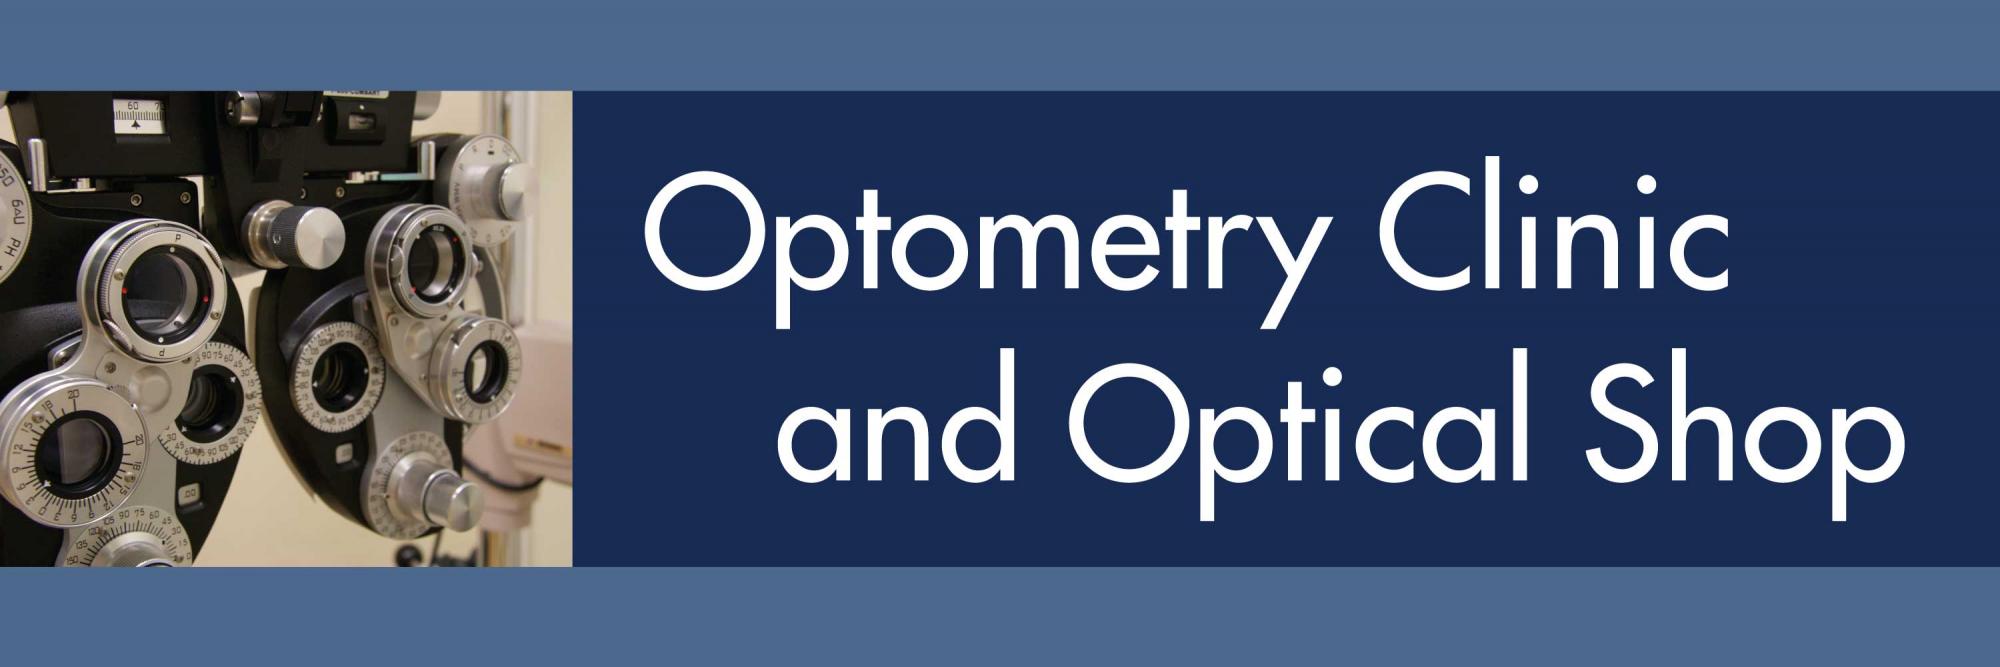 Optical services banner